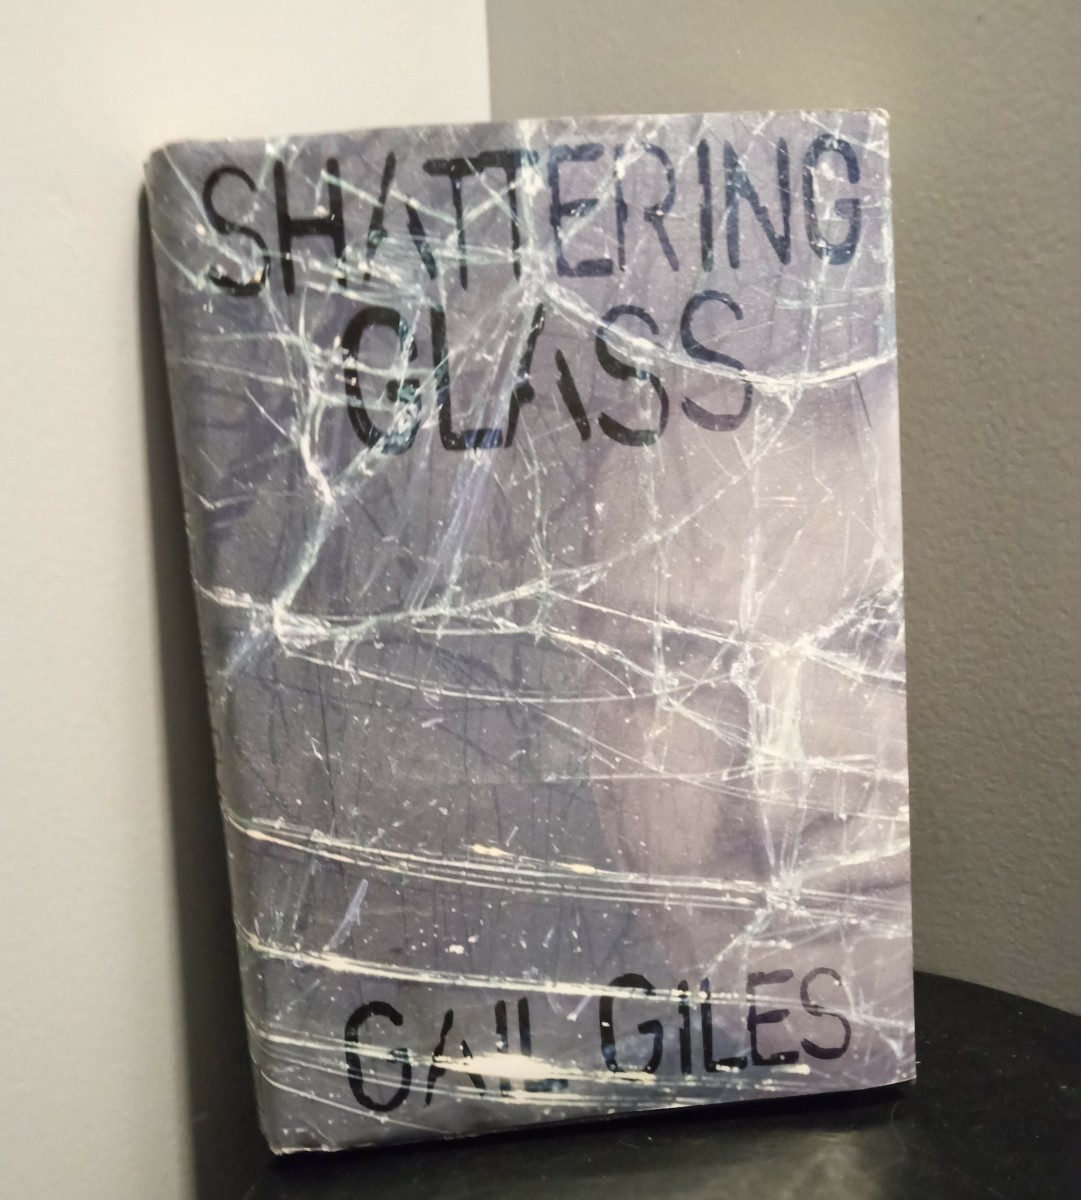 Shattering Glass - A Book Review